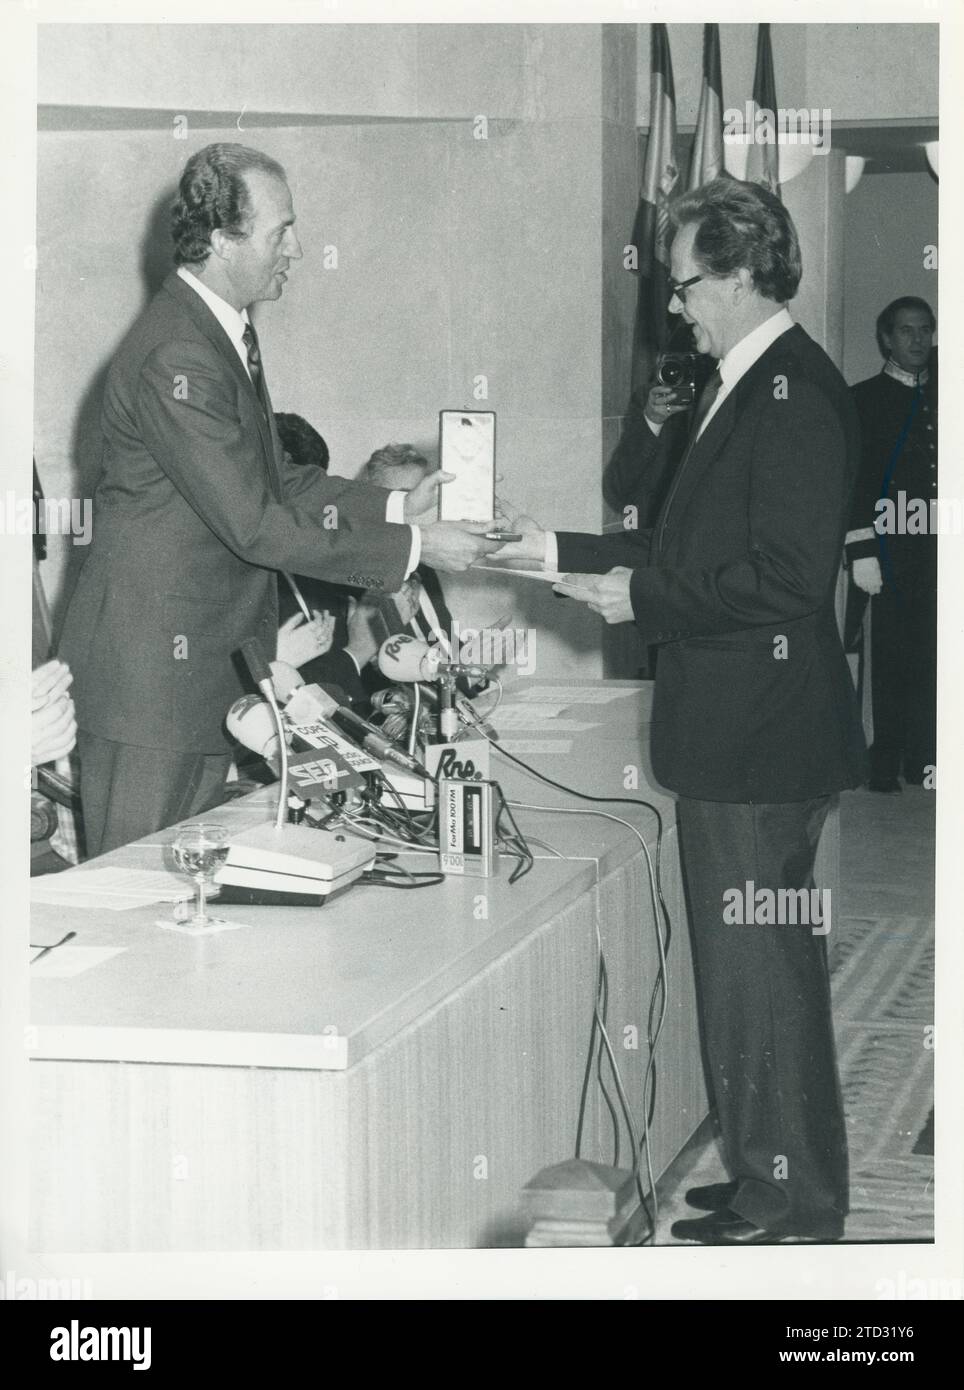 Madrid, 10/29/1985. Presentation of the gold medals of Fine Arts at the Prado Museum. In the image, King Don Juan Carlos gives the medal to the Canarian sculptor Martín Chirino. Credit: Album / Archivo ABC / Jaime Pato Stock Photo